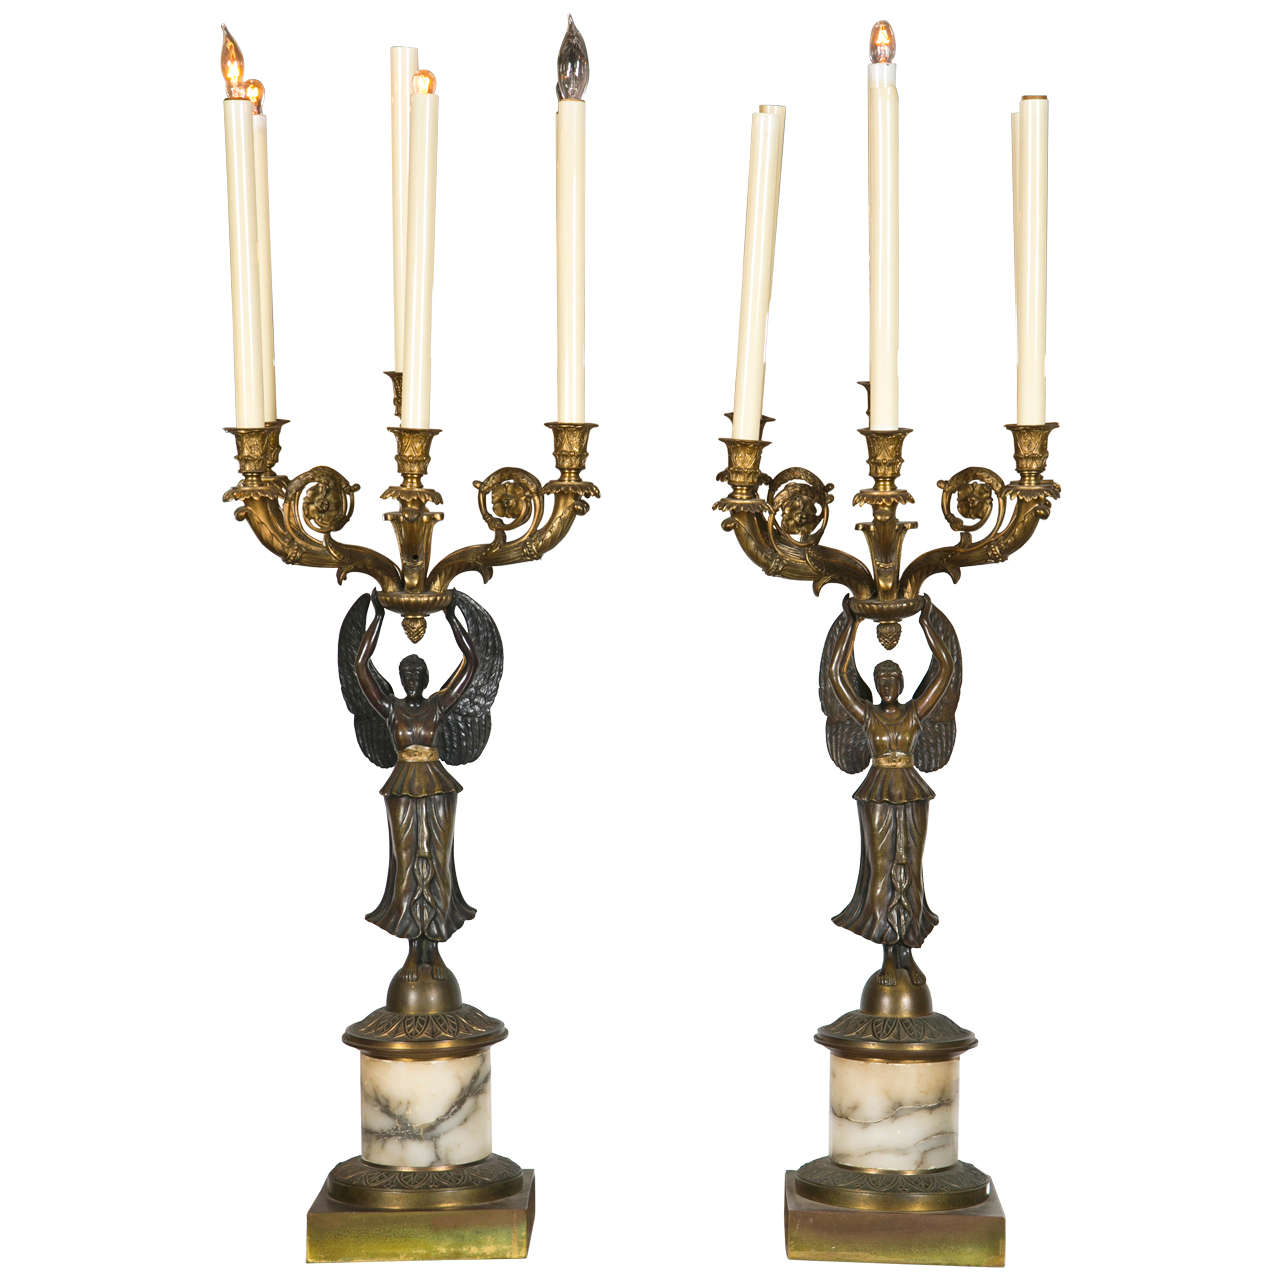 Pair of Neoclassical Style Bronze Candelabras